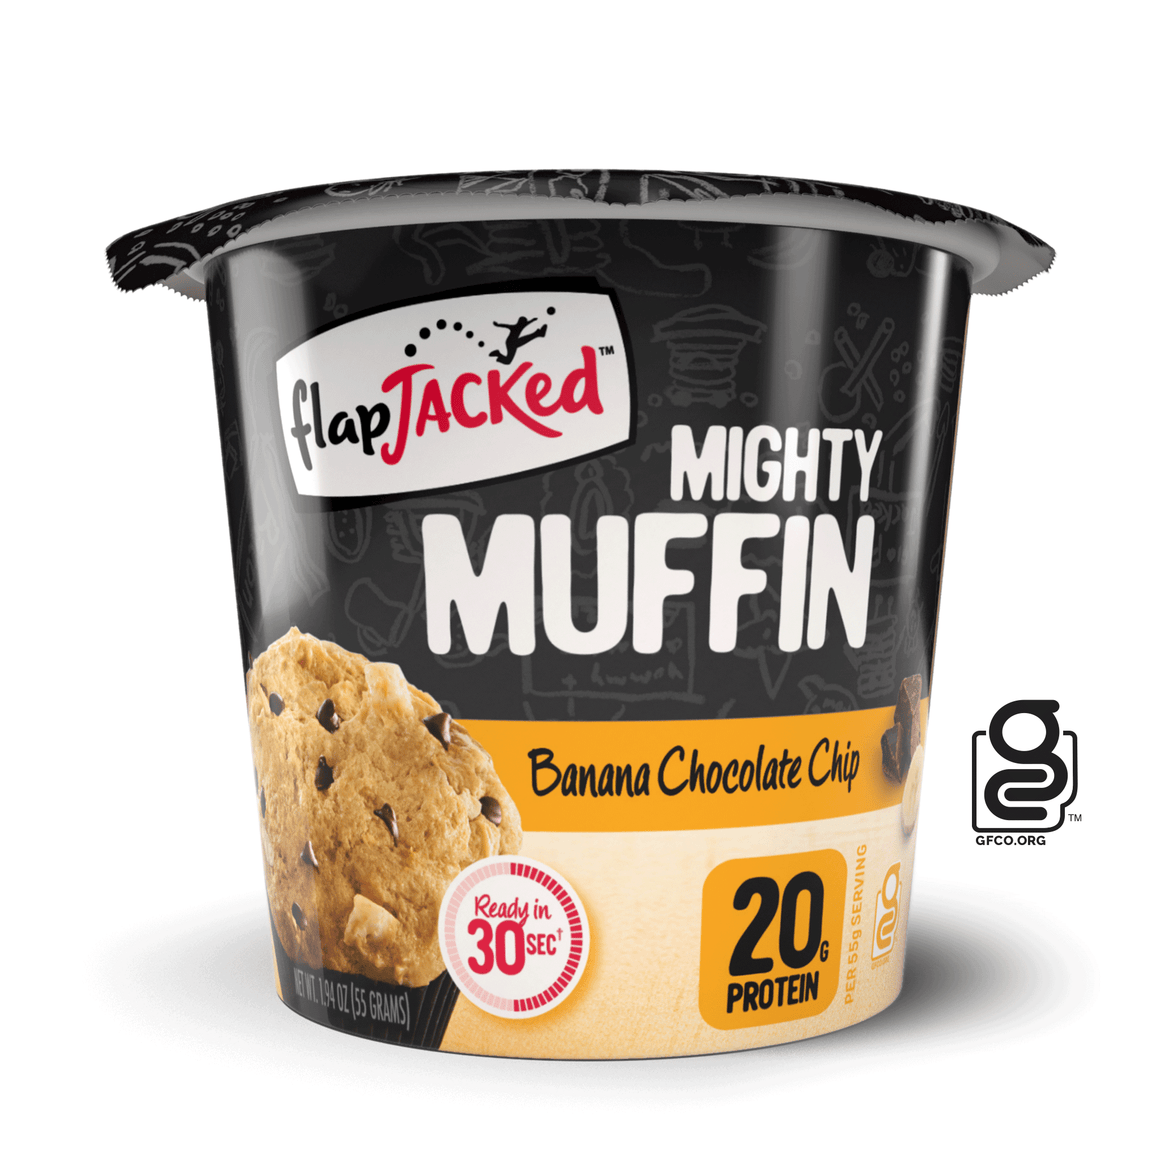 FlapJacked Banana Chocolate Chip Mighty Muffin Certified Gluten Free